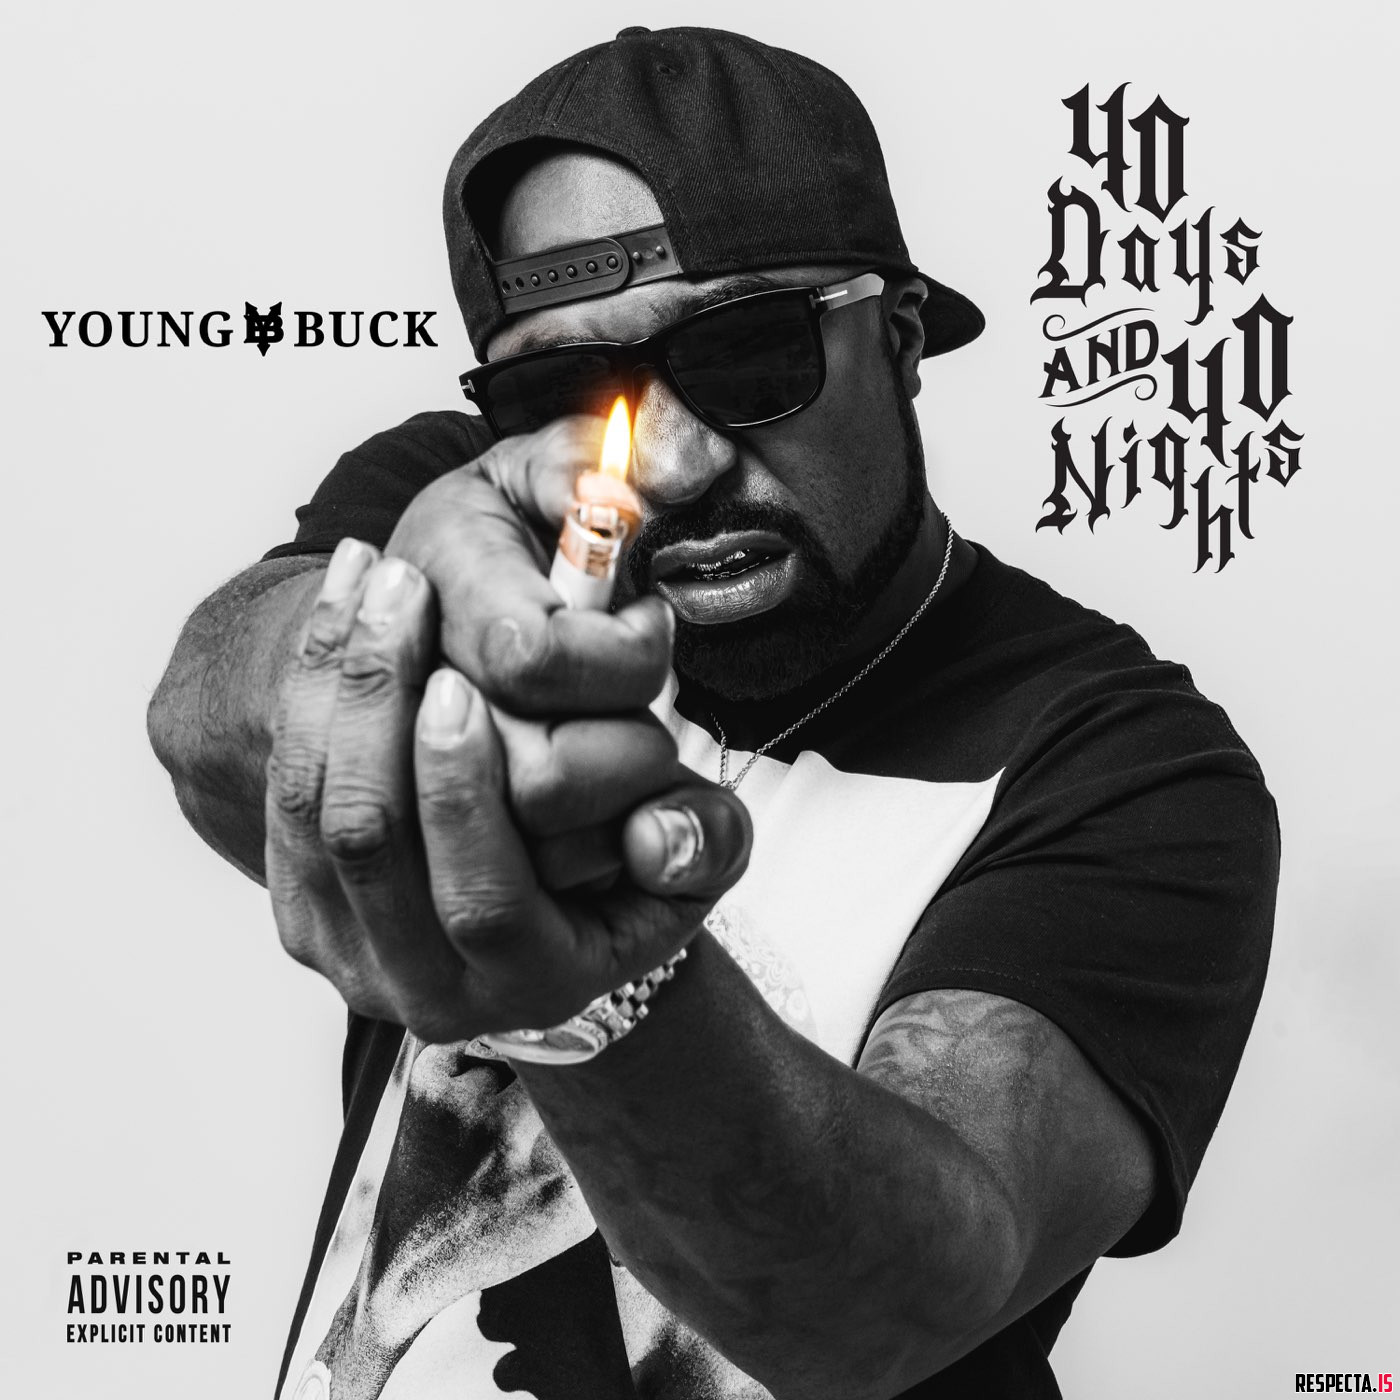 1625155193_young-buck-40-days-and-40-nig